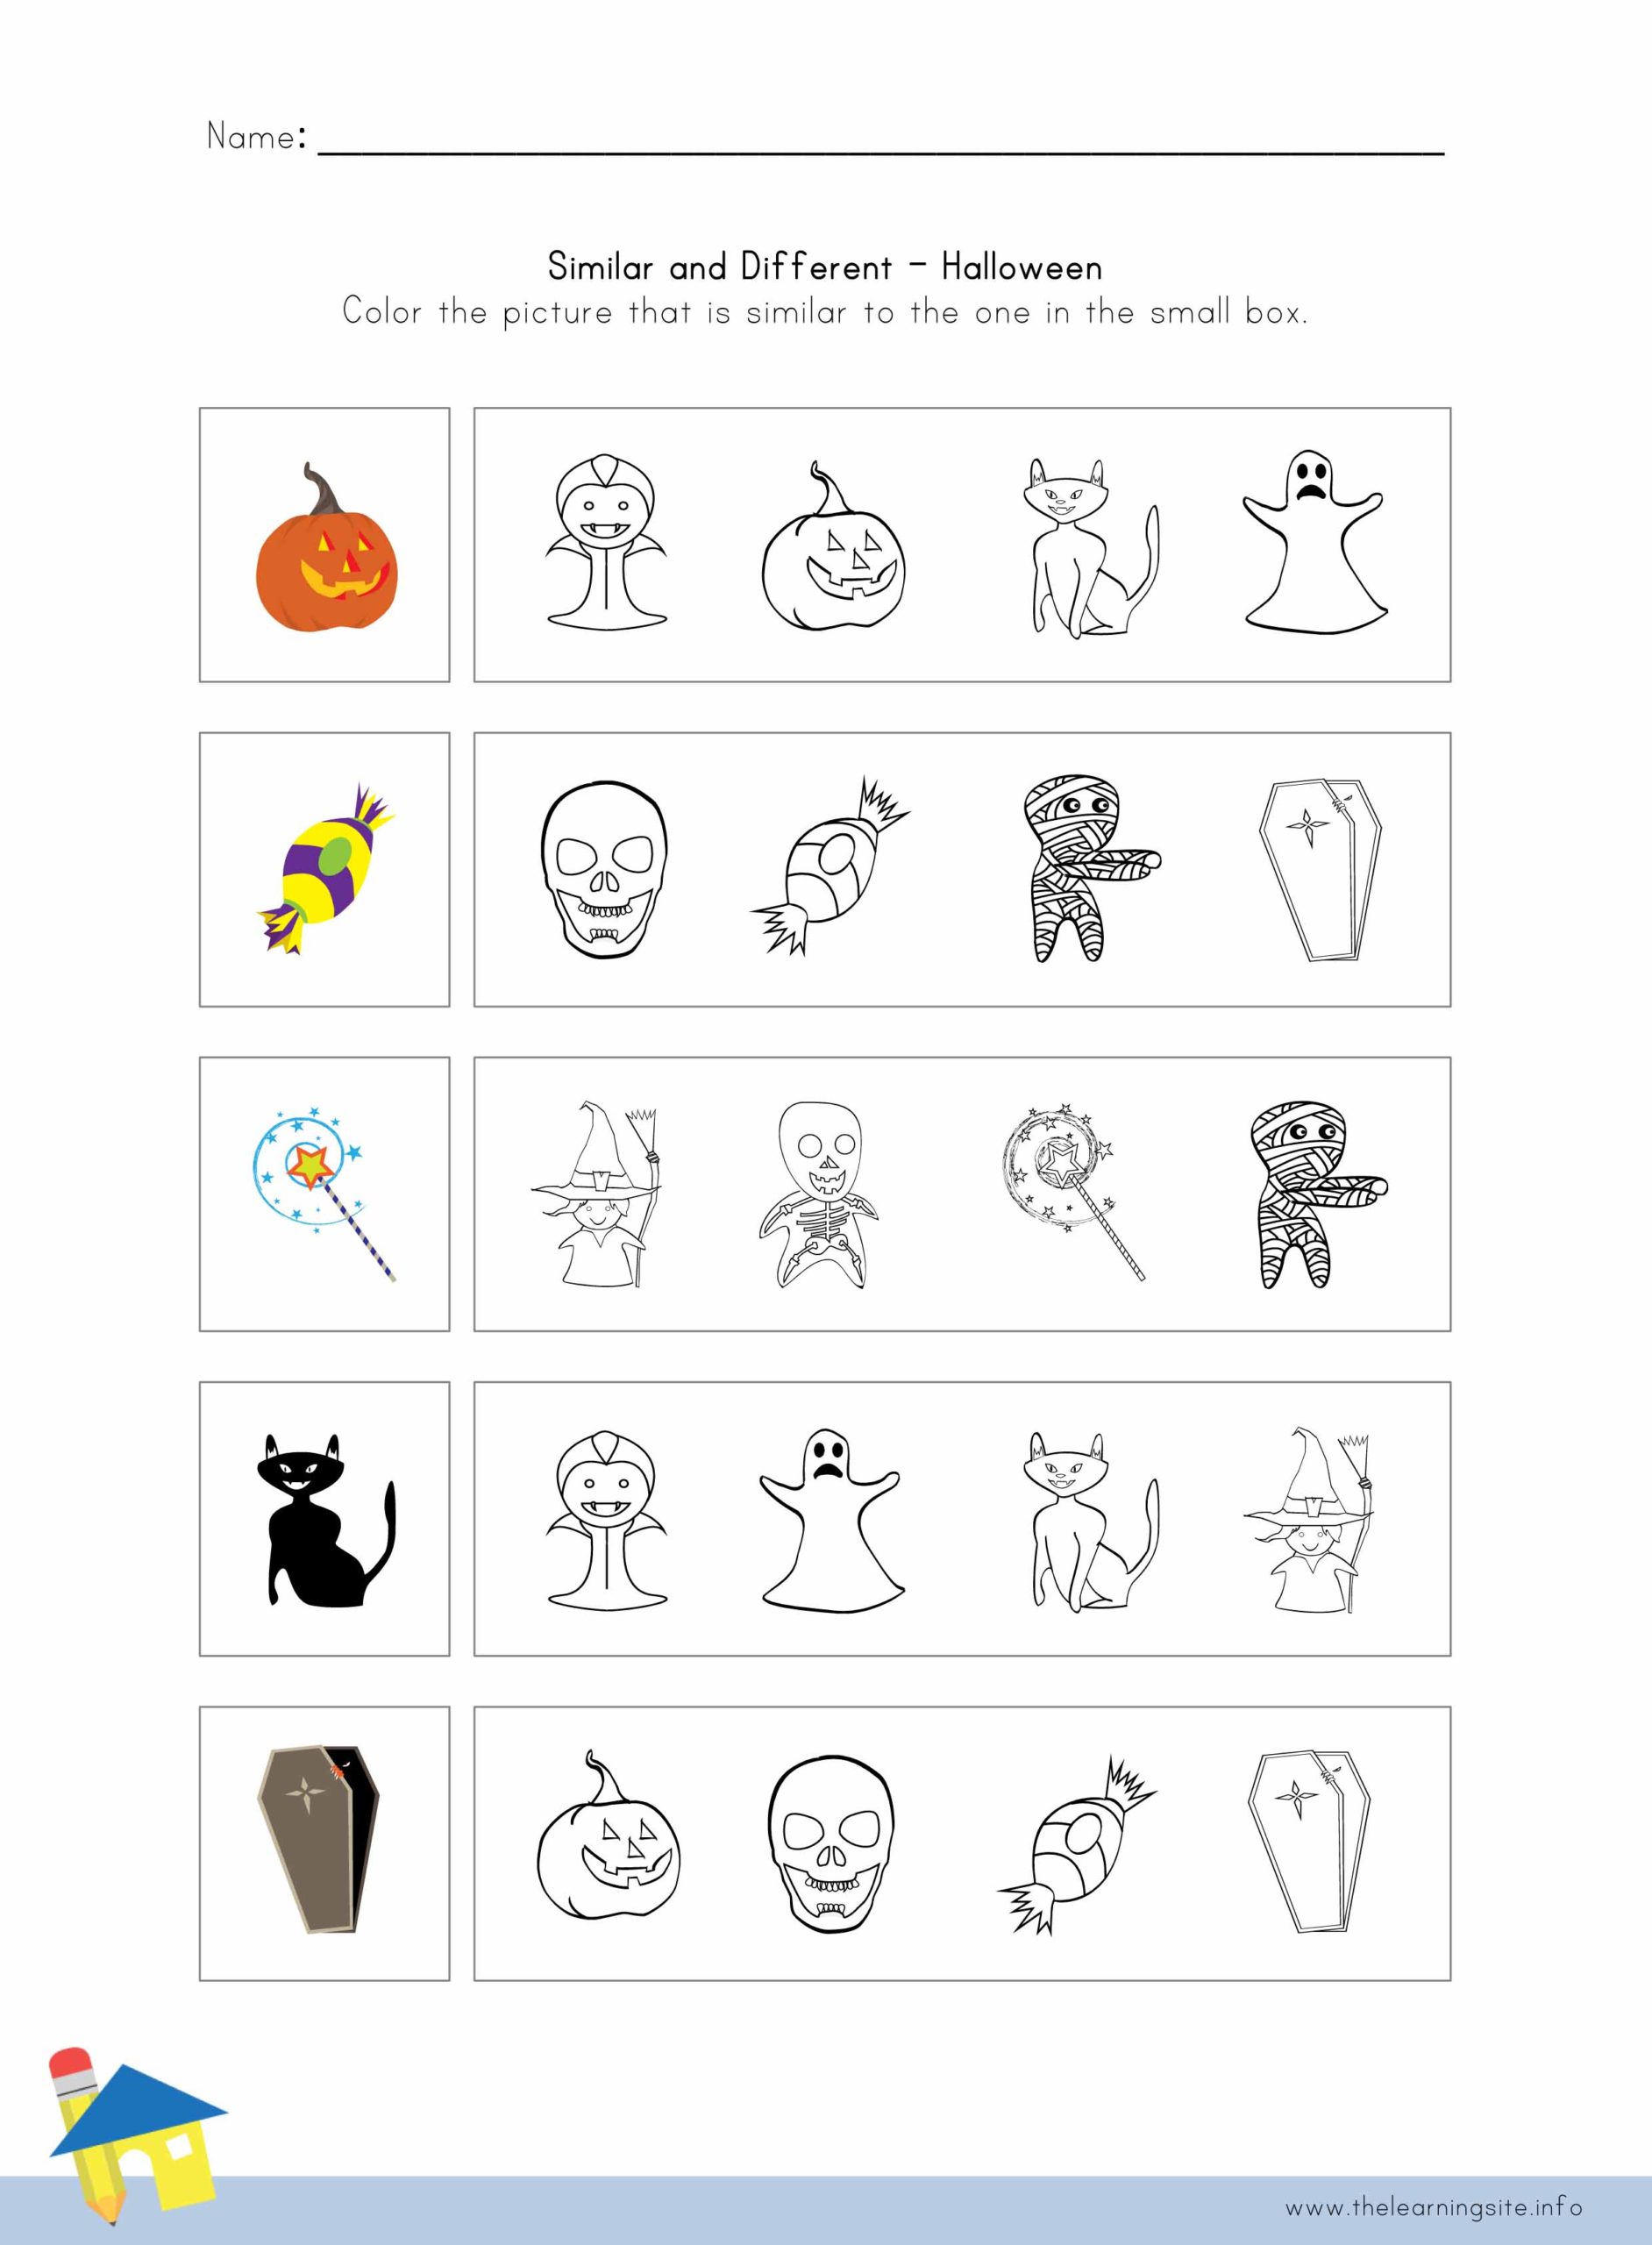 Halloween Similar and Different Worksheet 4 The Learning